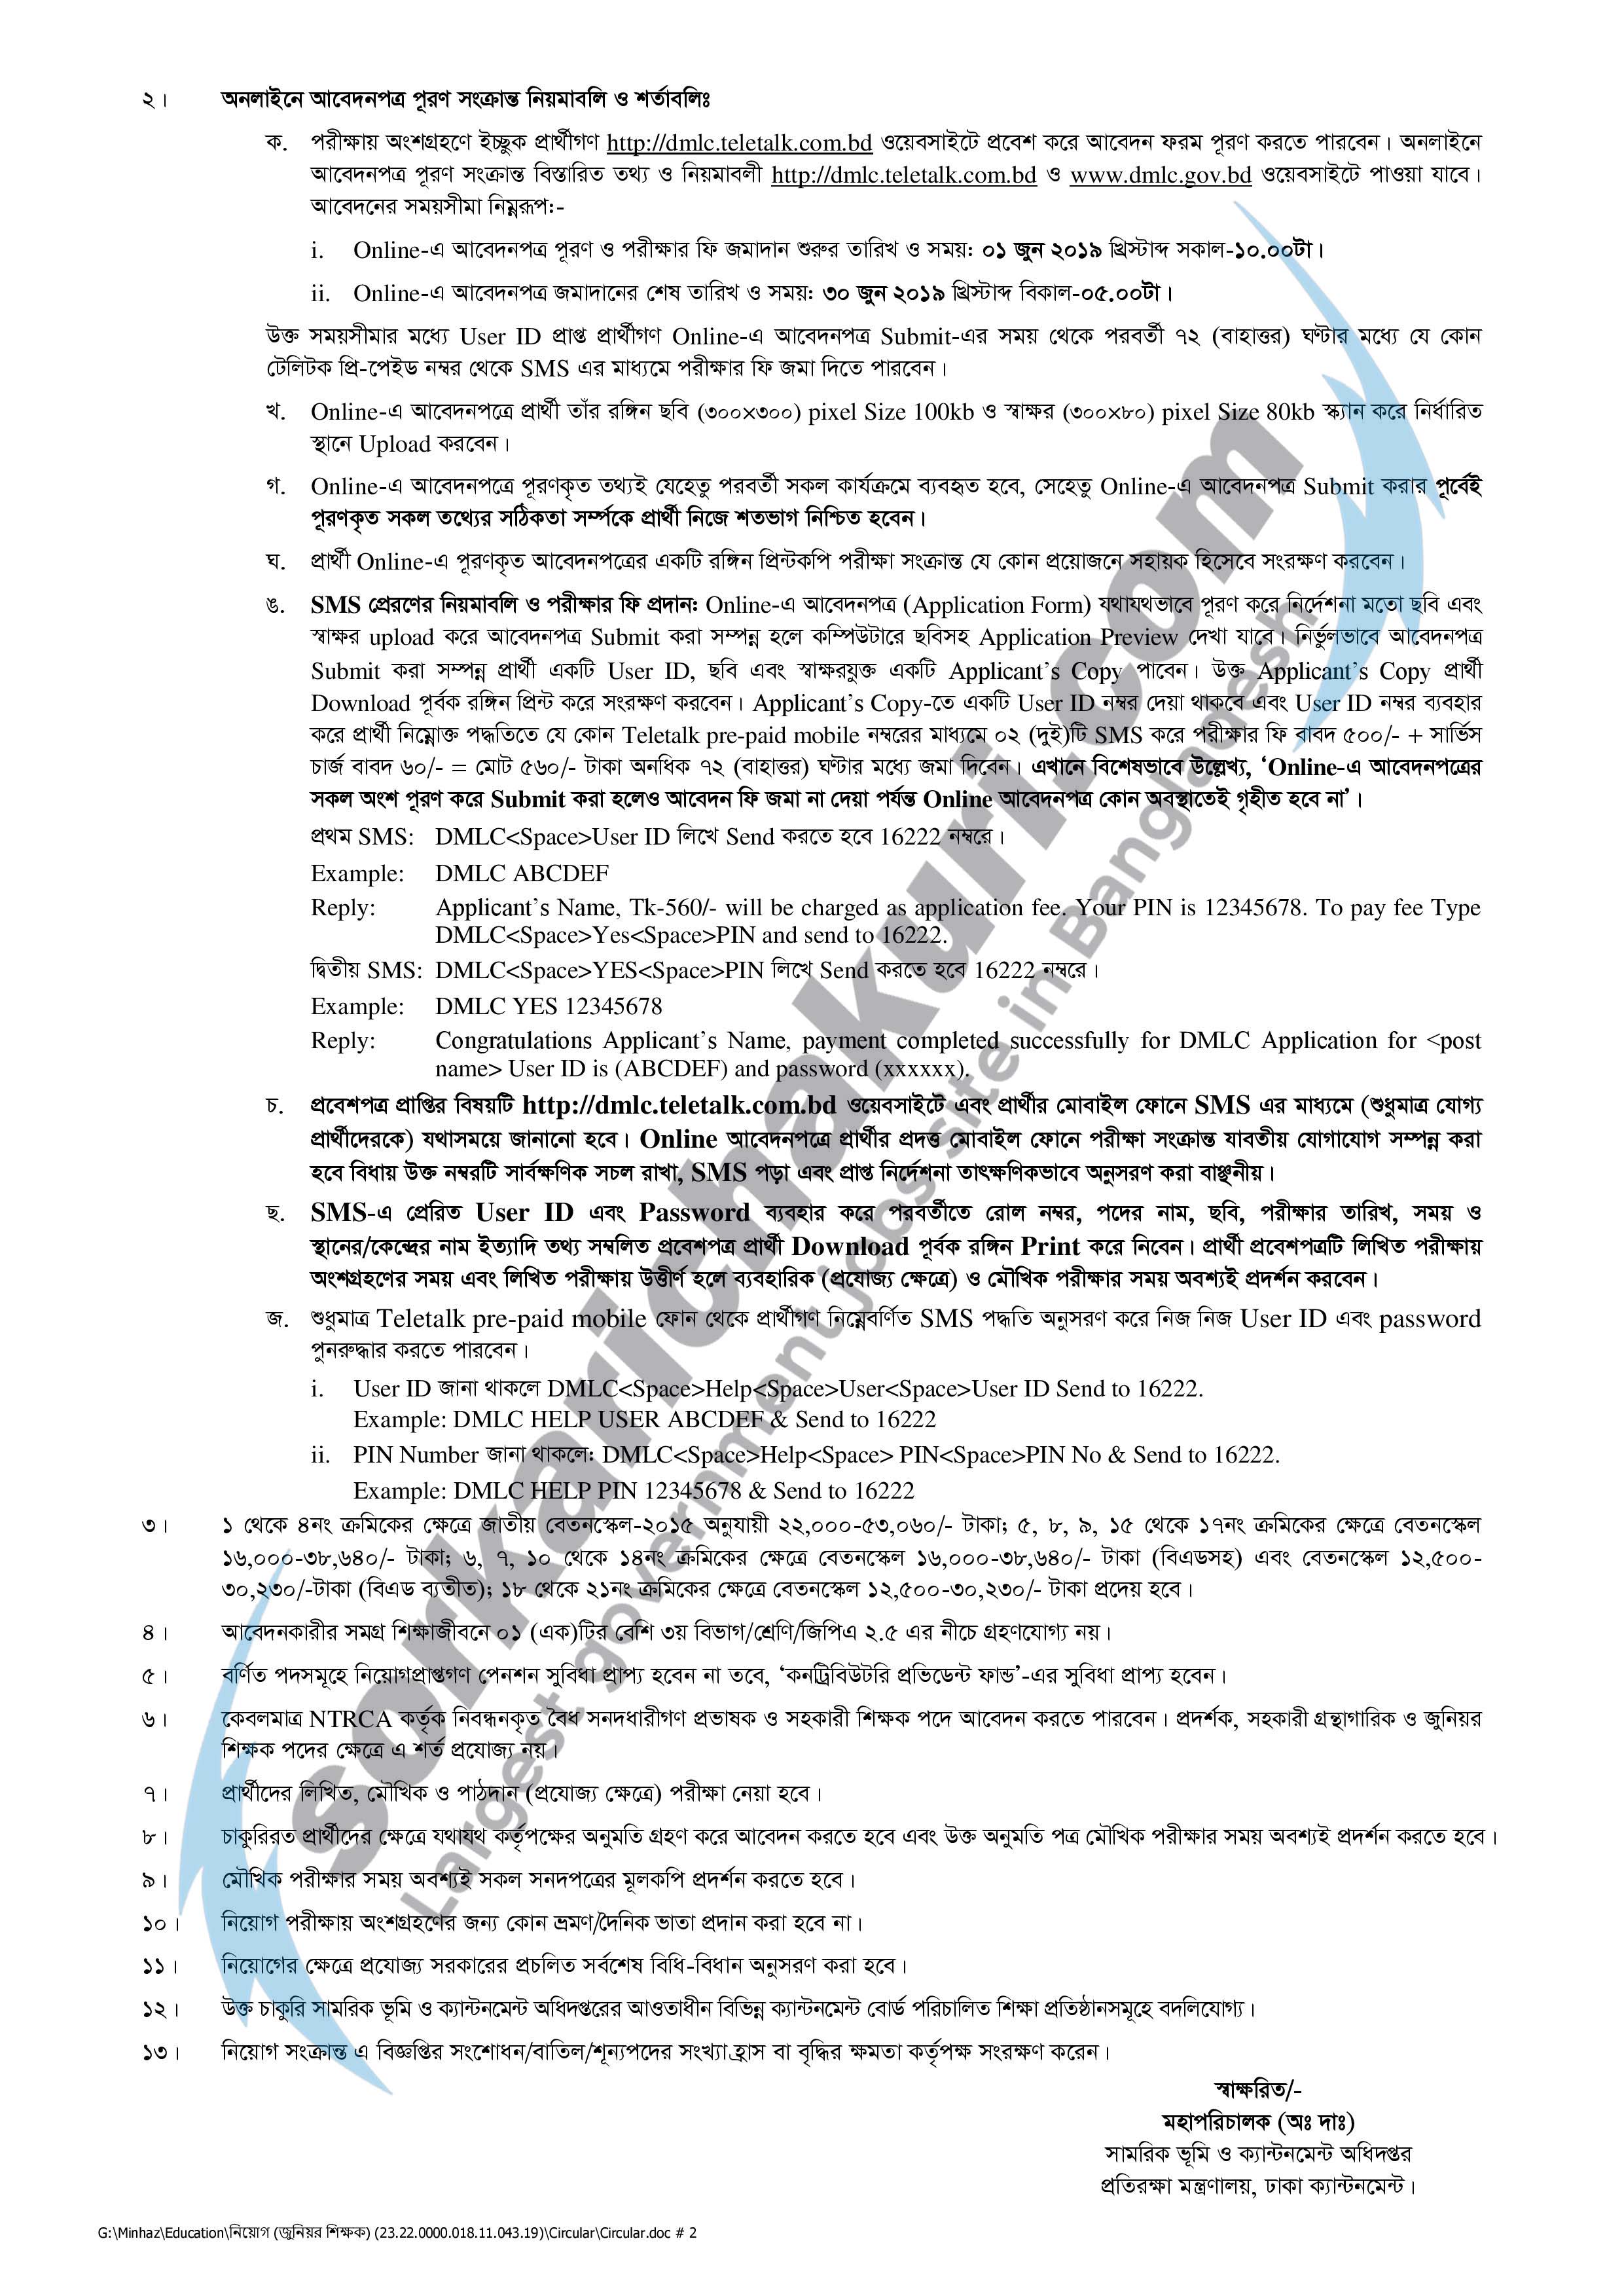 Department of Military Lands and Cantonment Jobs Circular 2019